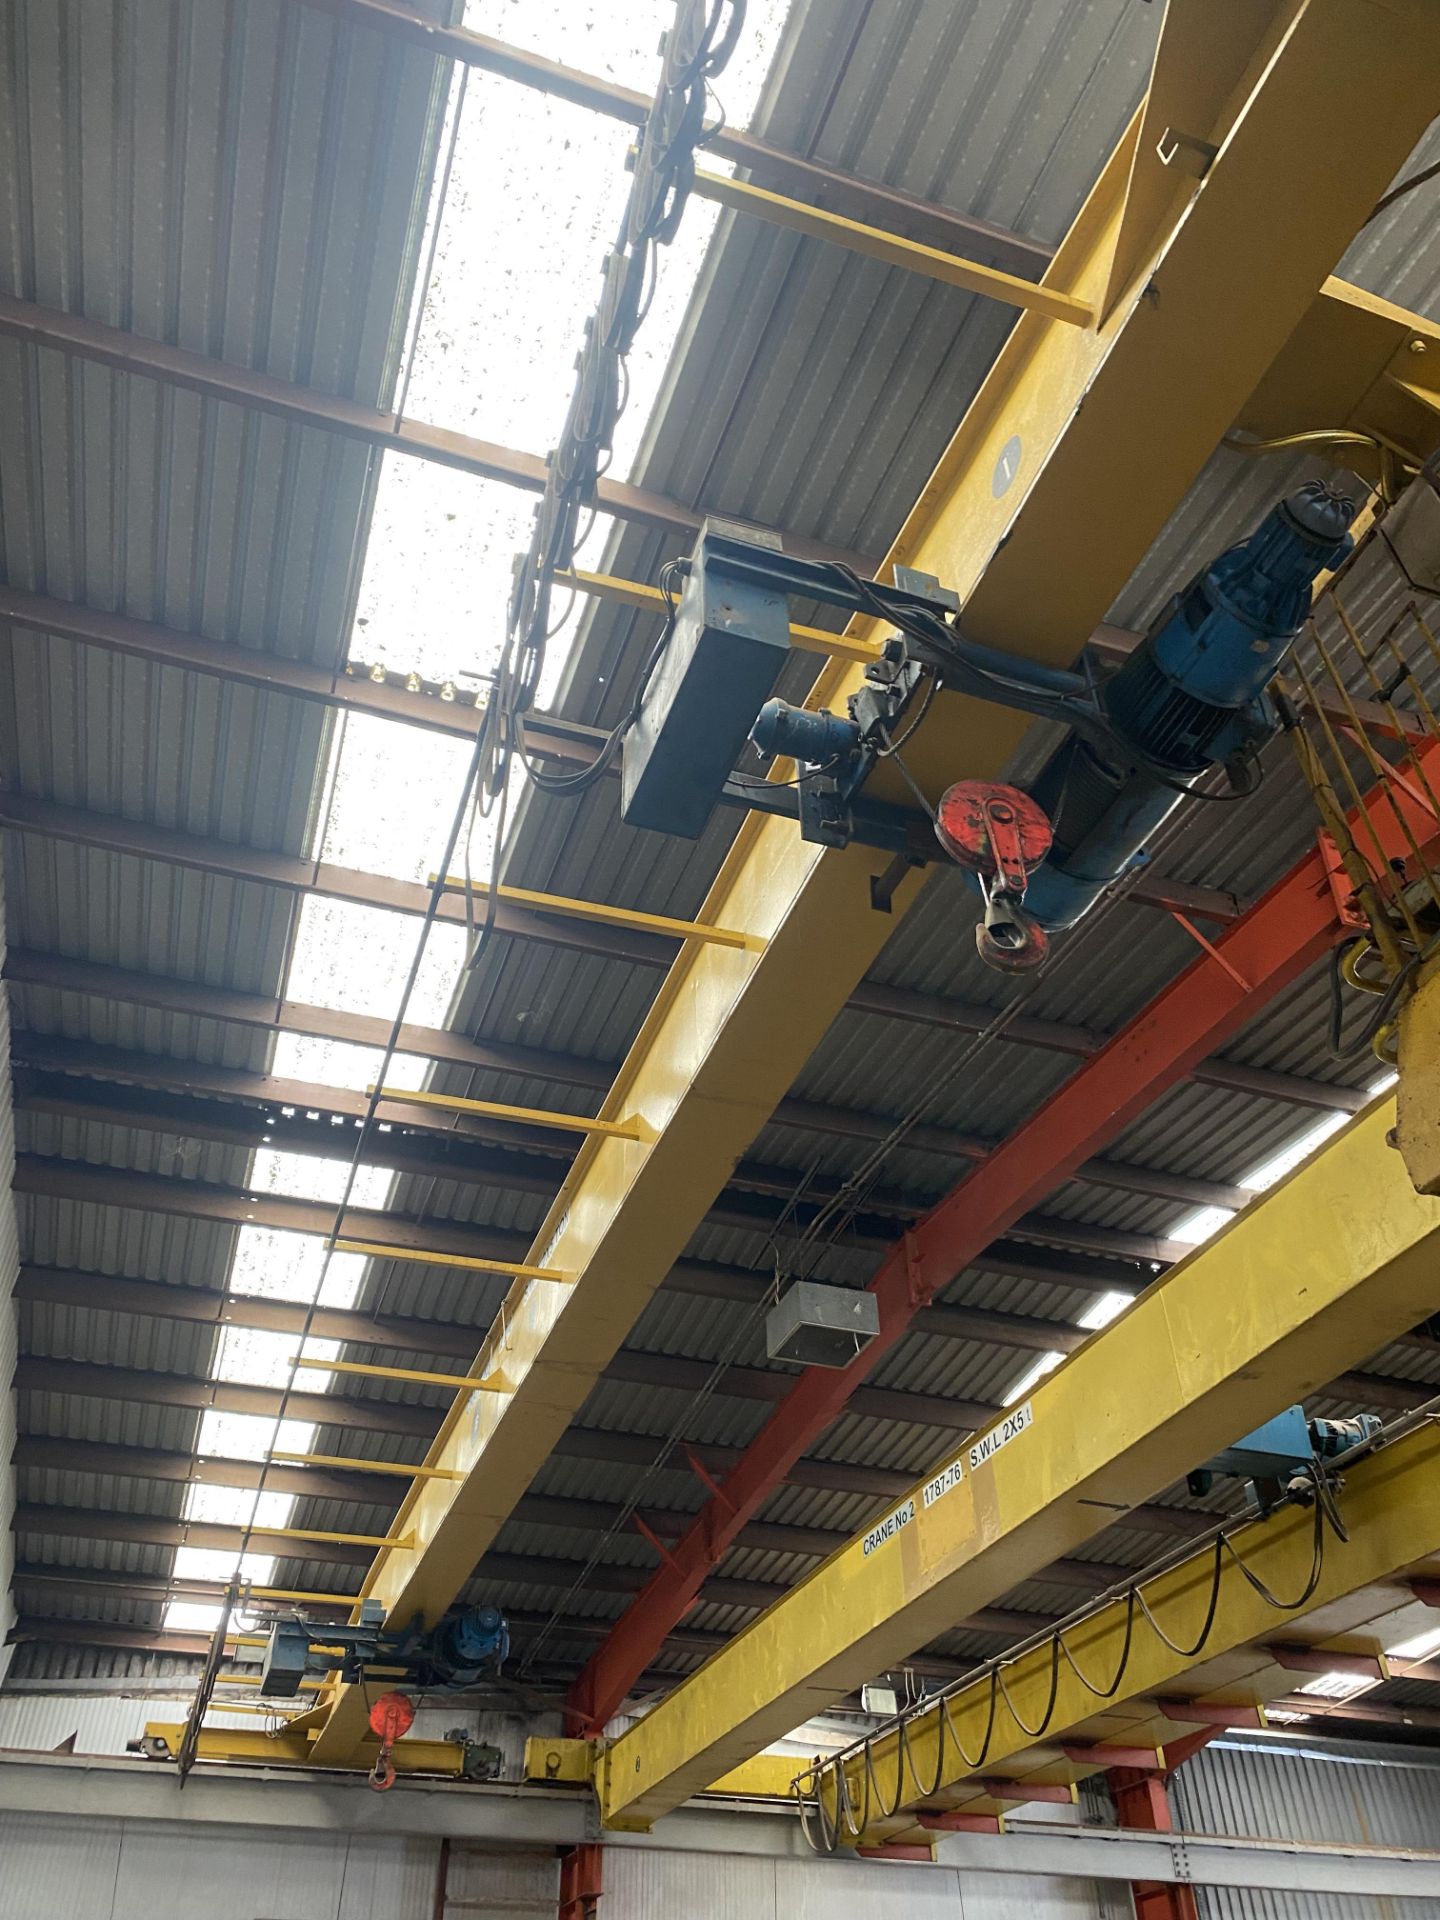 2 X 5T SWL SINGLE GIRDER TRAVELLING OVERHEAD CRANE, crane no. 220, approx. 18m span, with twin - Image 4 of 4